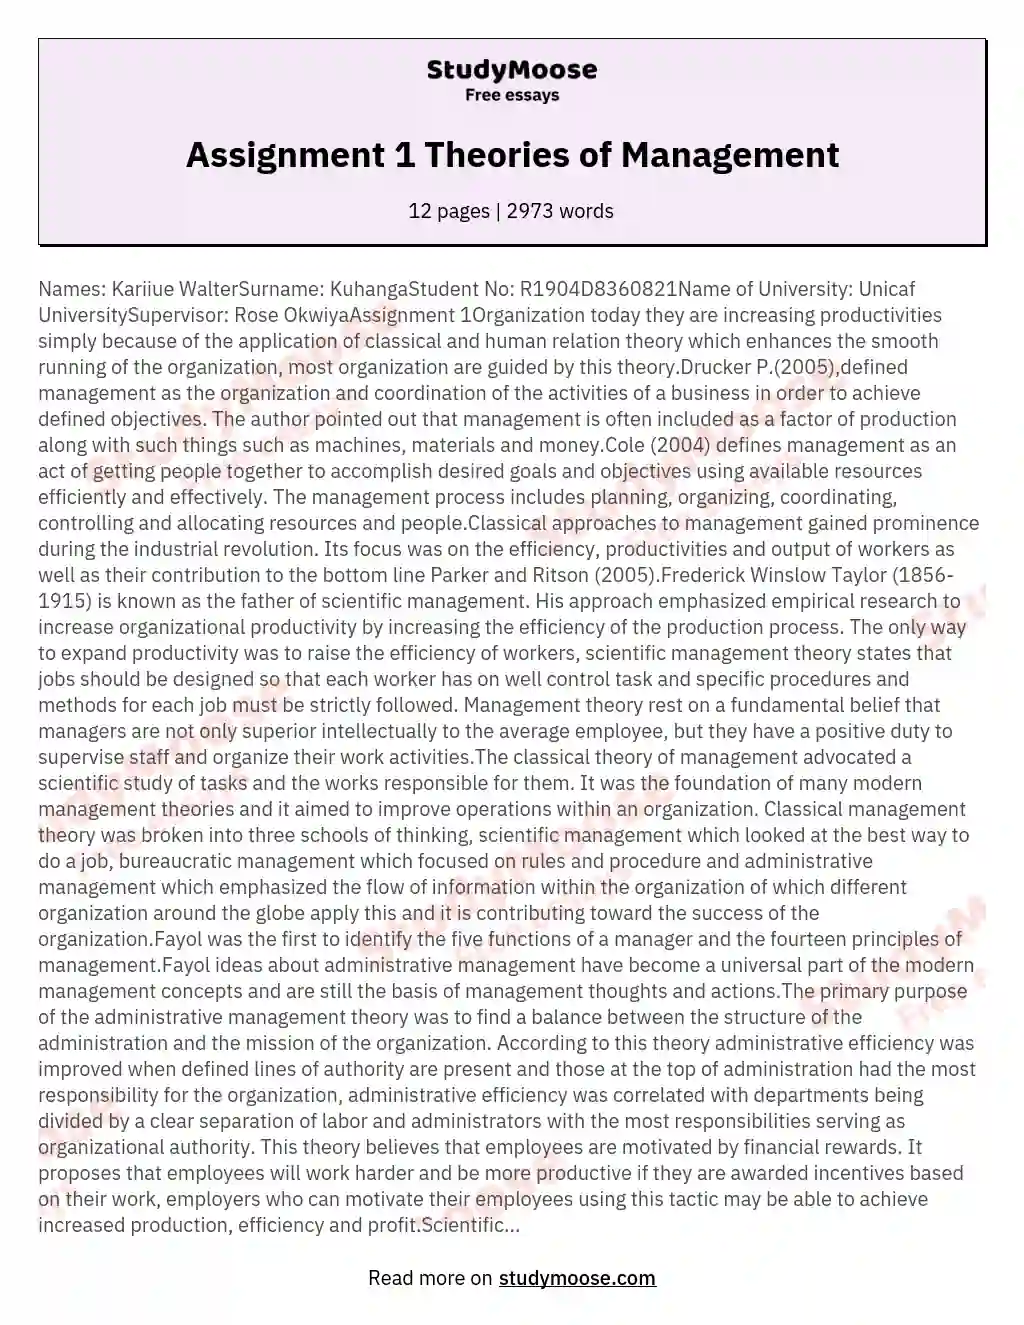 Assignment 1 Theories of Management essay